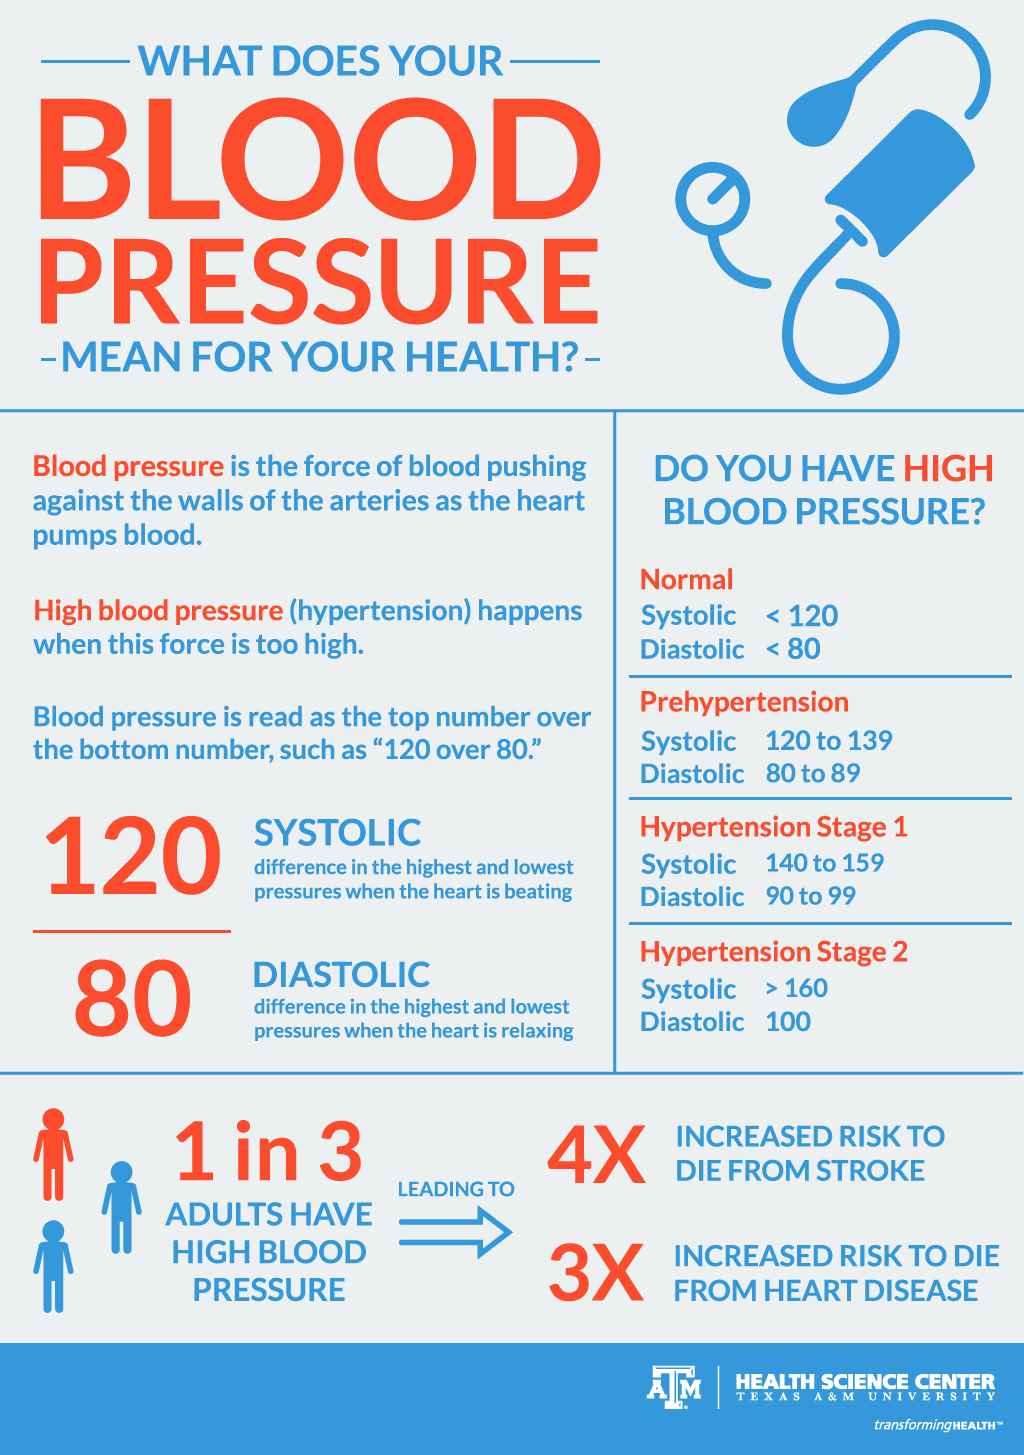 what do the readings mean on blood pressure